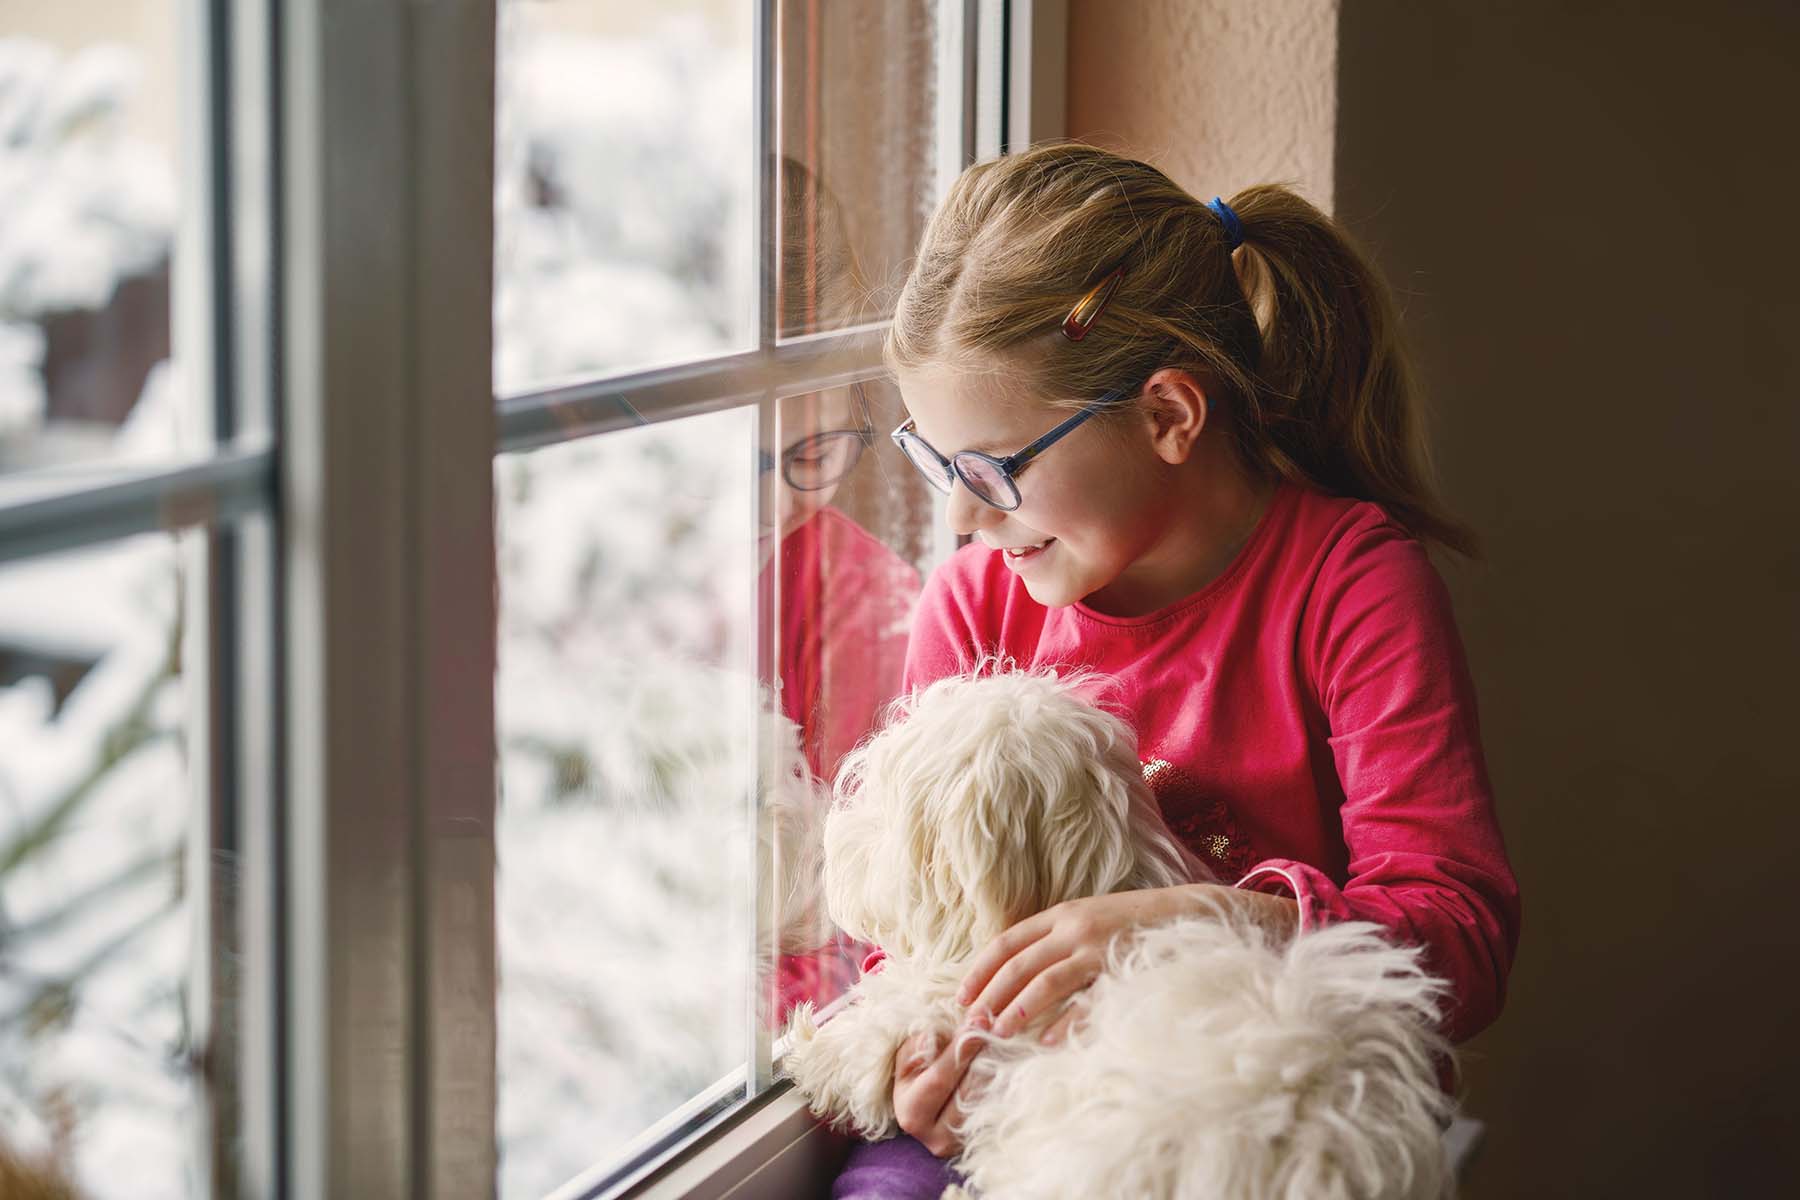 Girl with glasses holding a dog, looking out a snowy window.